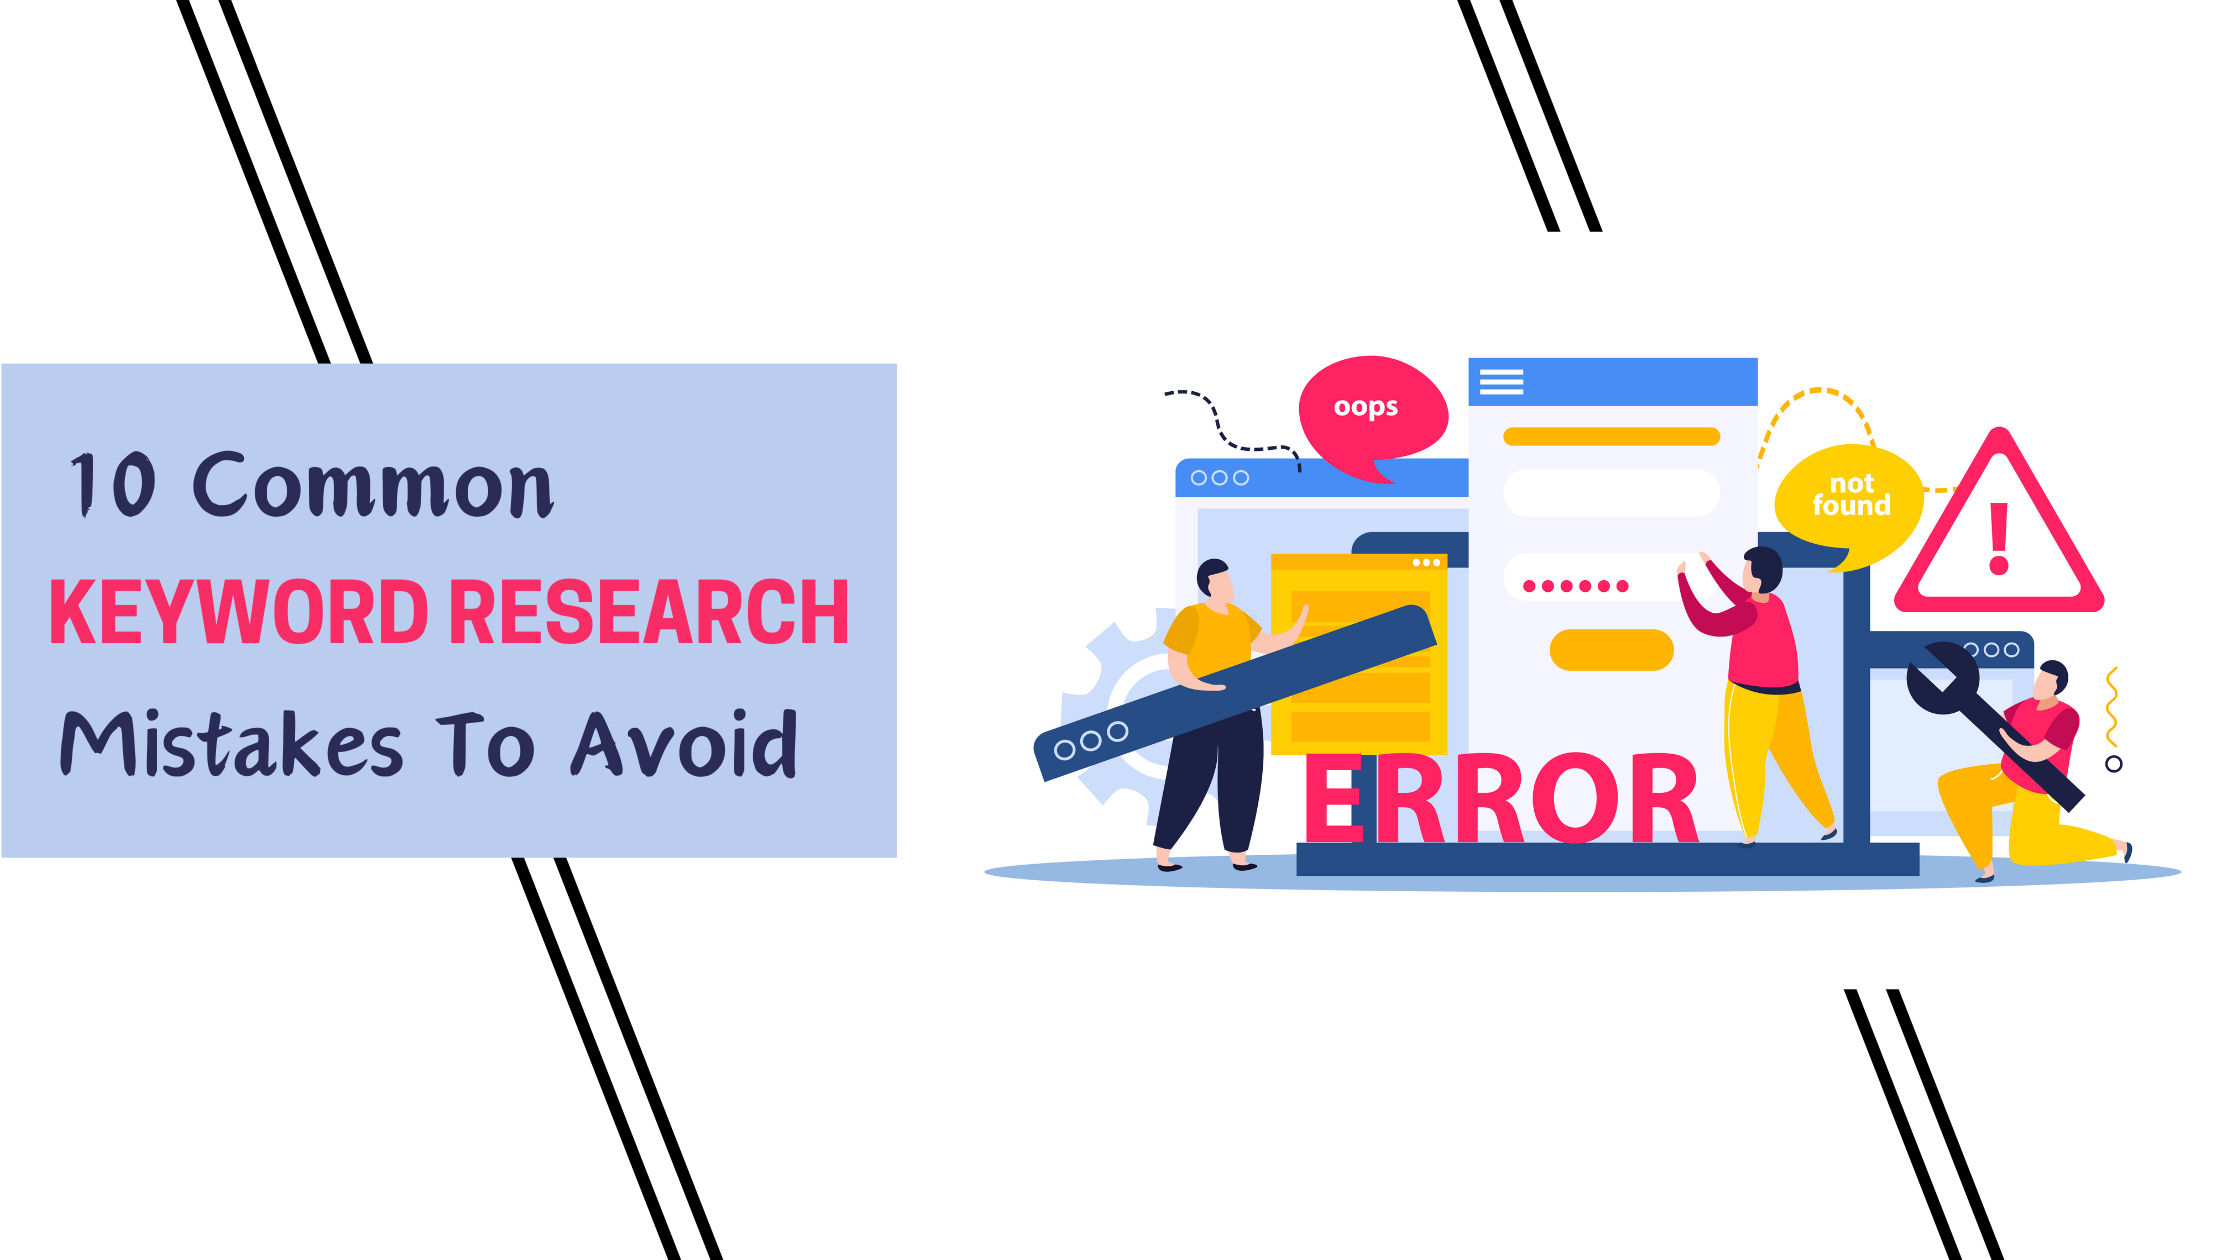 Common keyword research mistakes